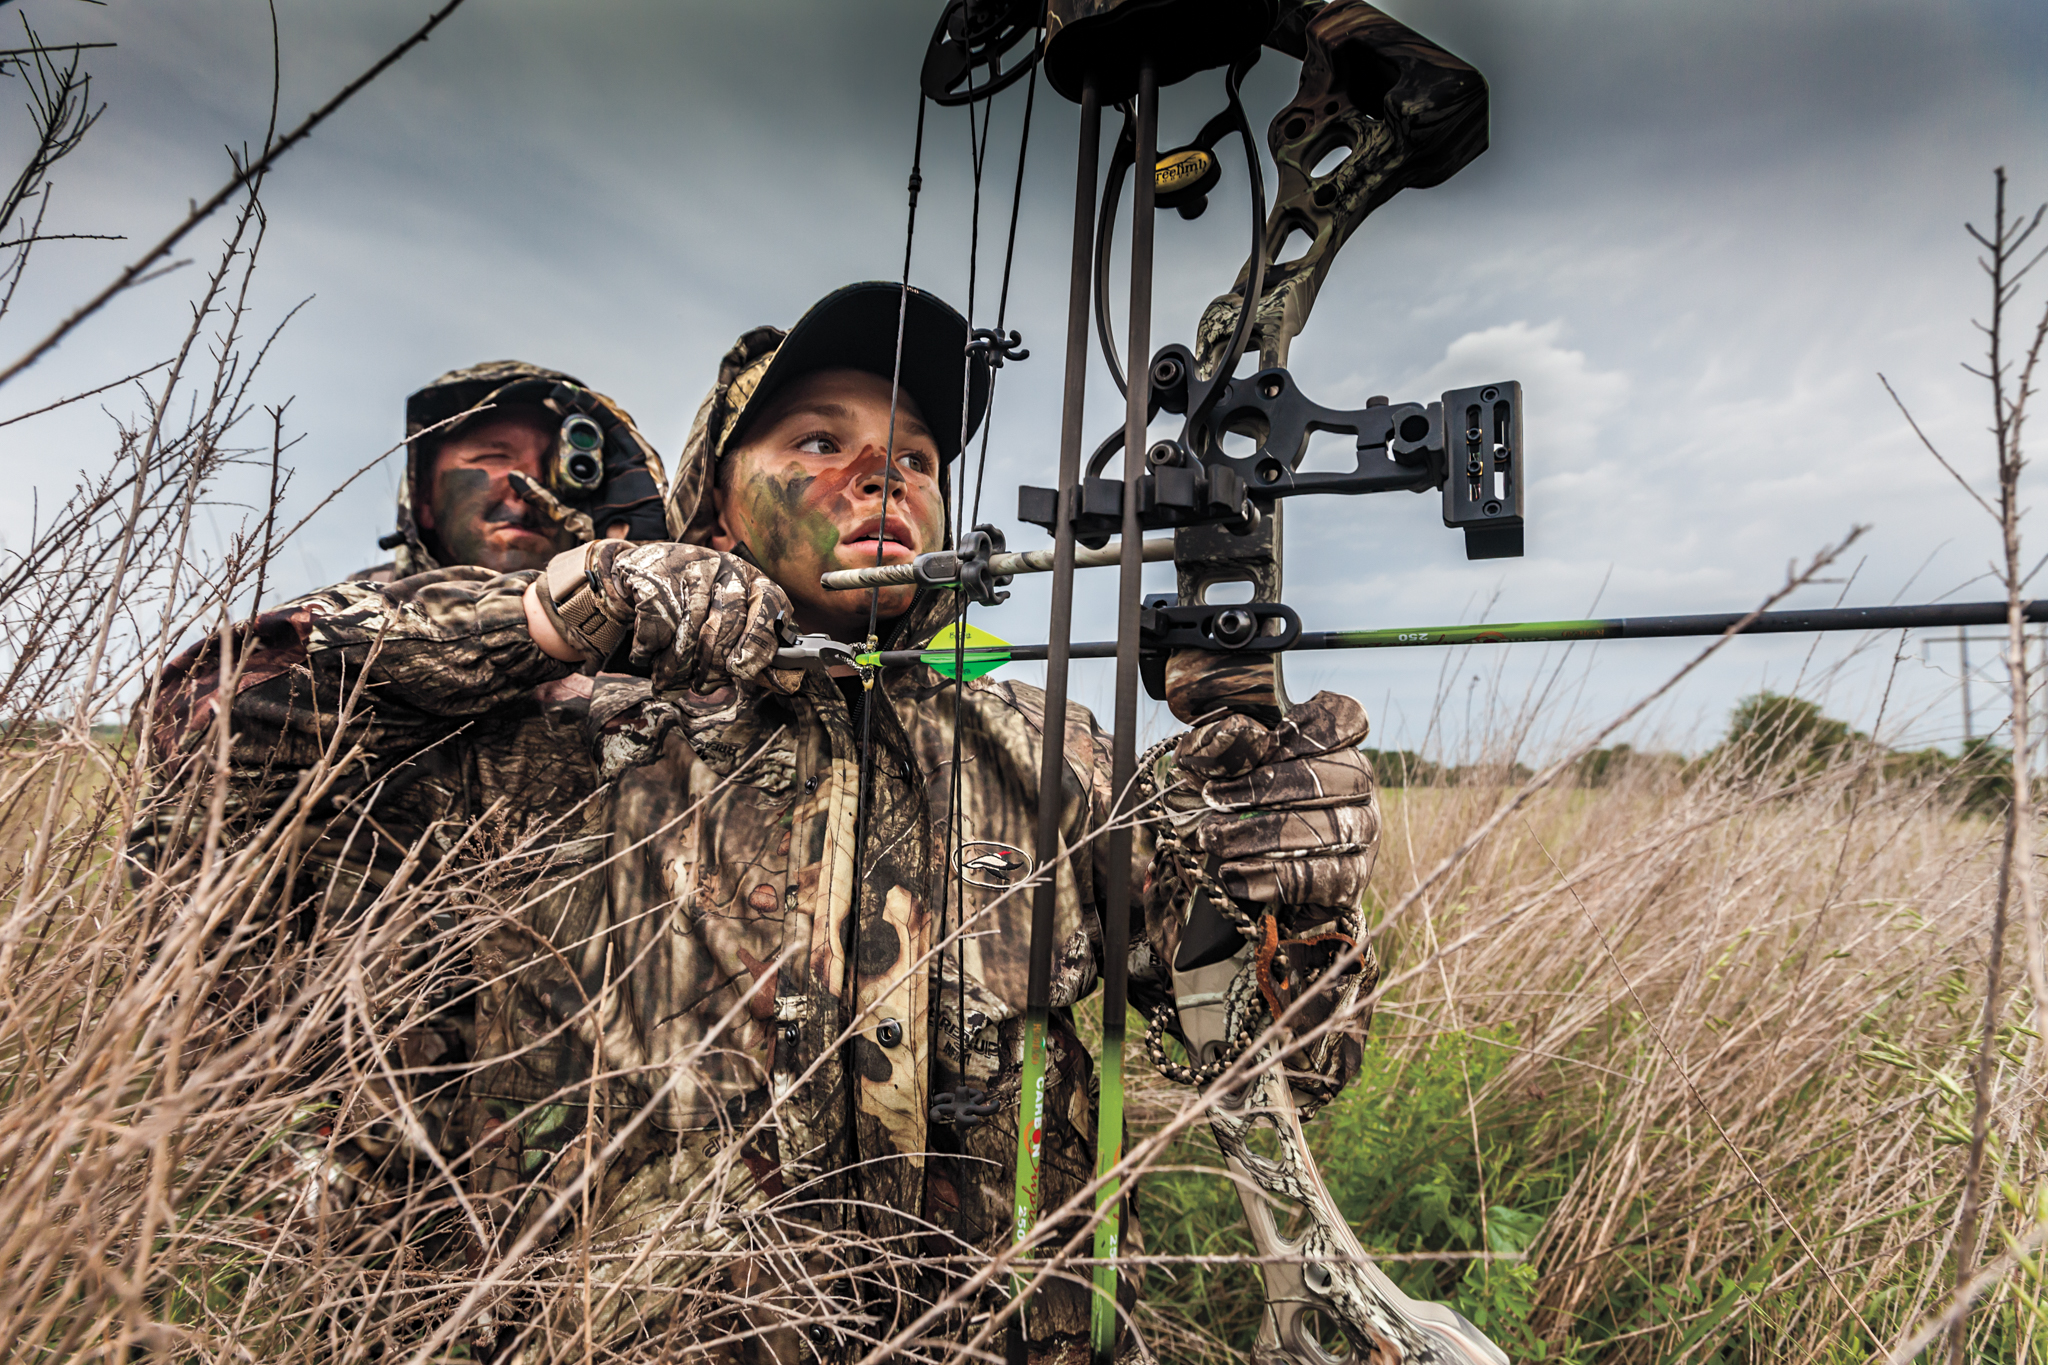 father and son on archery hunt in field